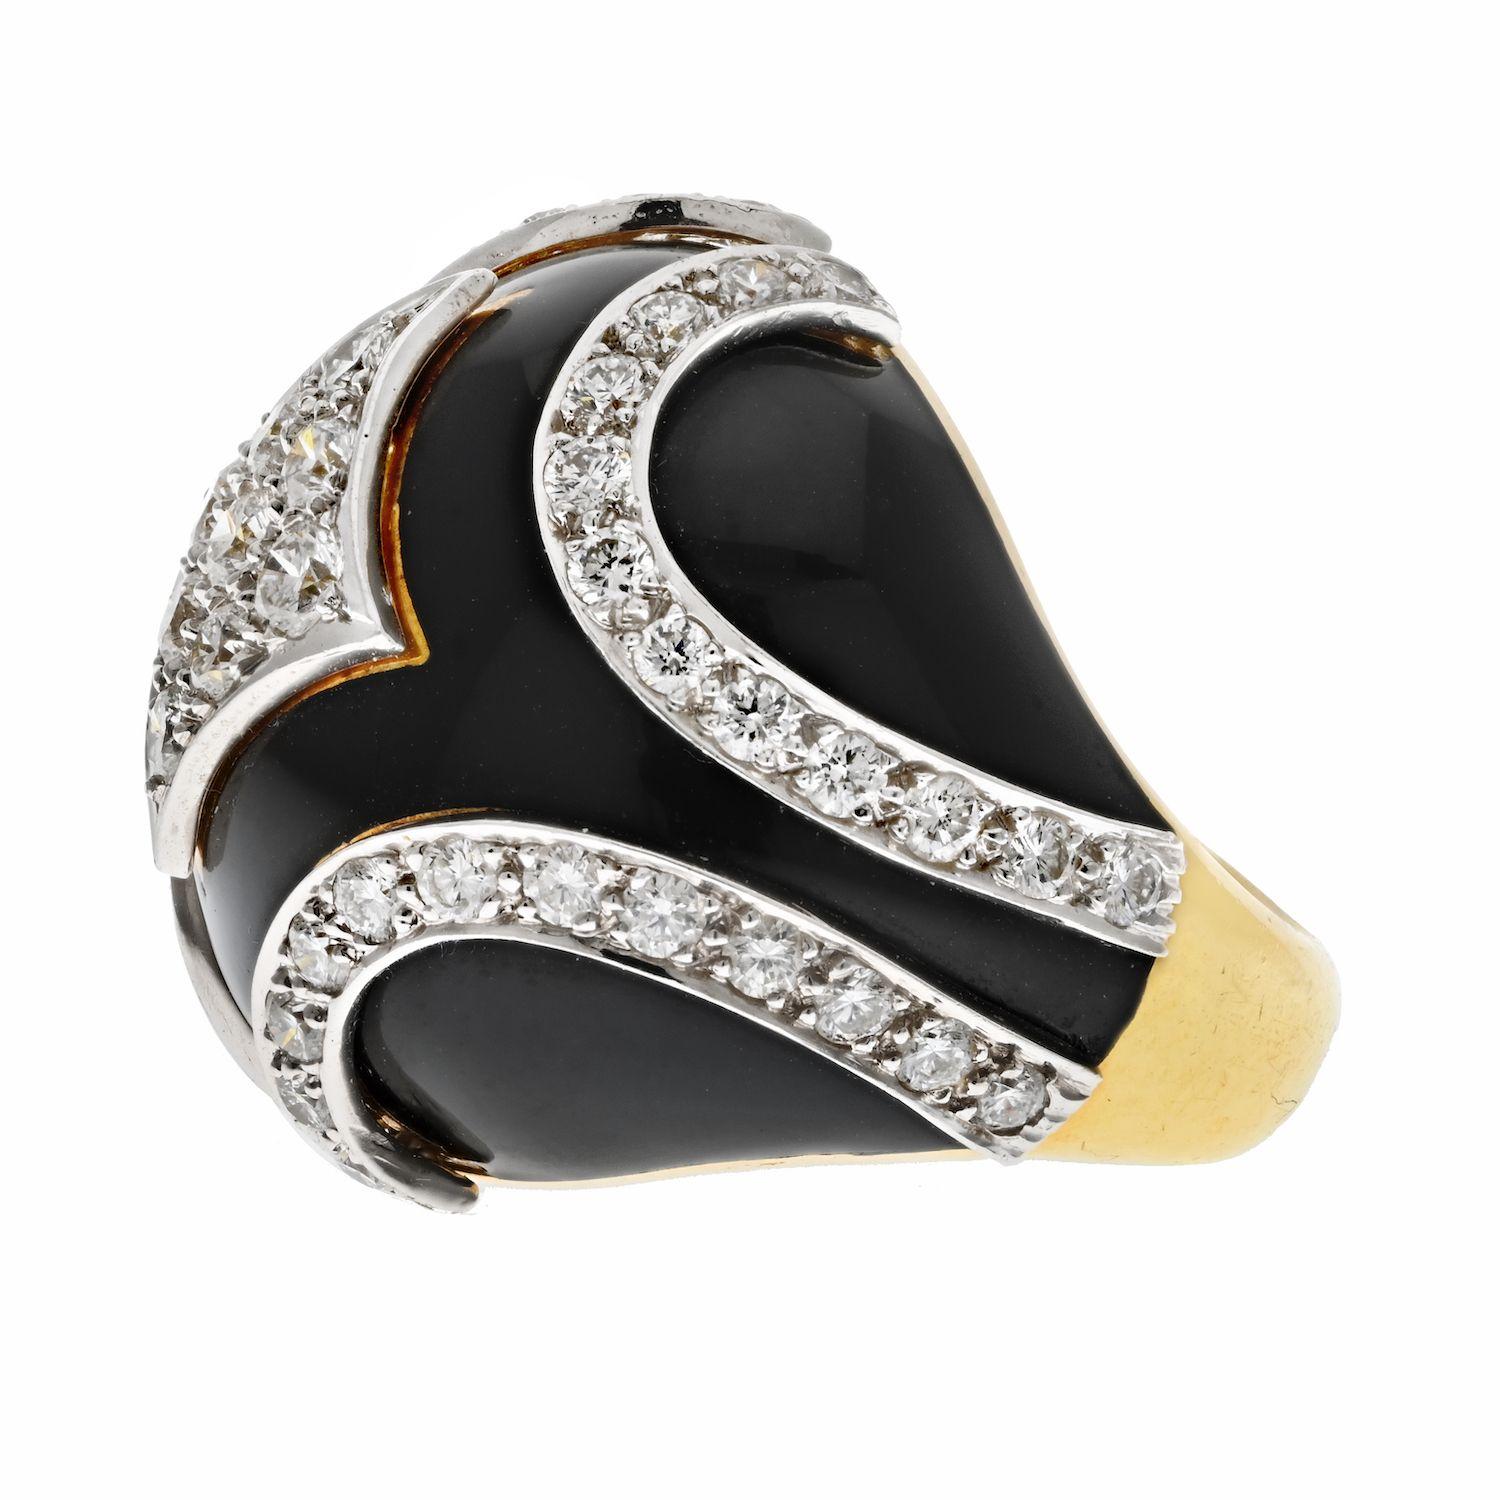 This beautiful David Webb Platinum & 18K Yellow Gold Black Enamel Diamond Bombe Ring is a true statement piece. It features a striking black enamel design, outlined with an intricate pavé of round brilliant diamonds, set in 18K yellow gold and